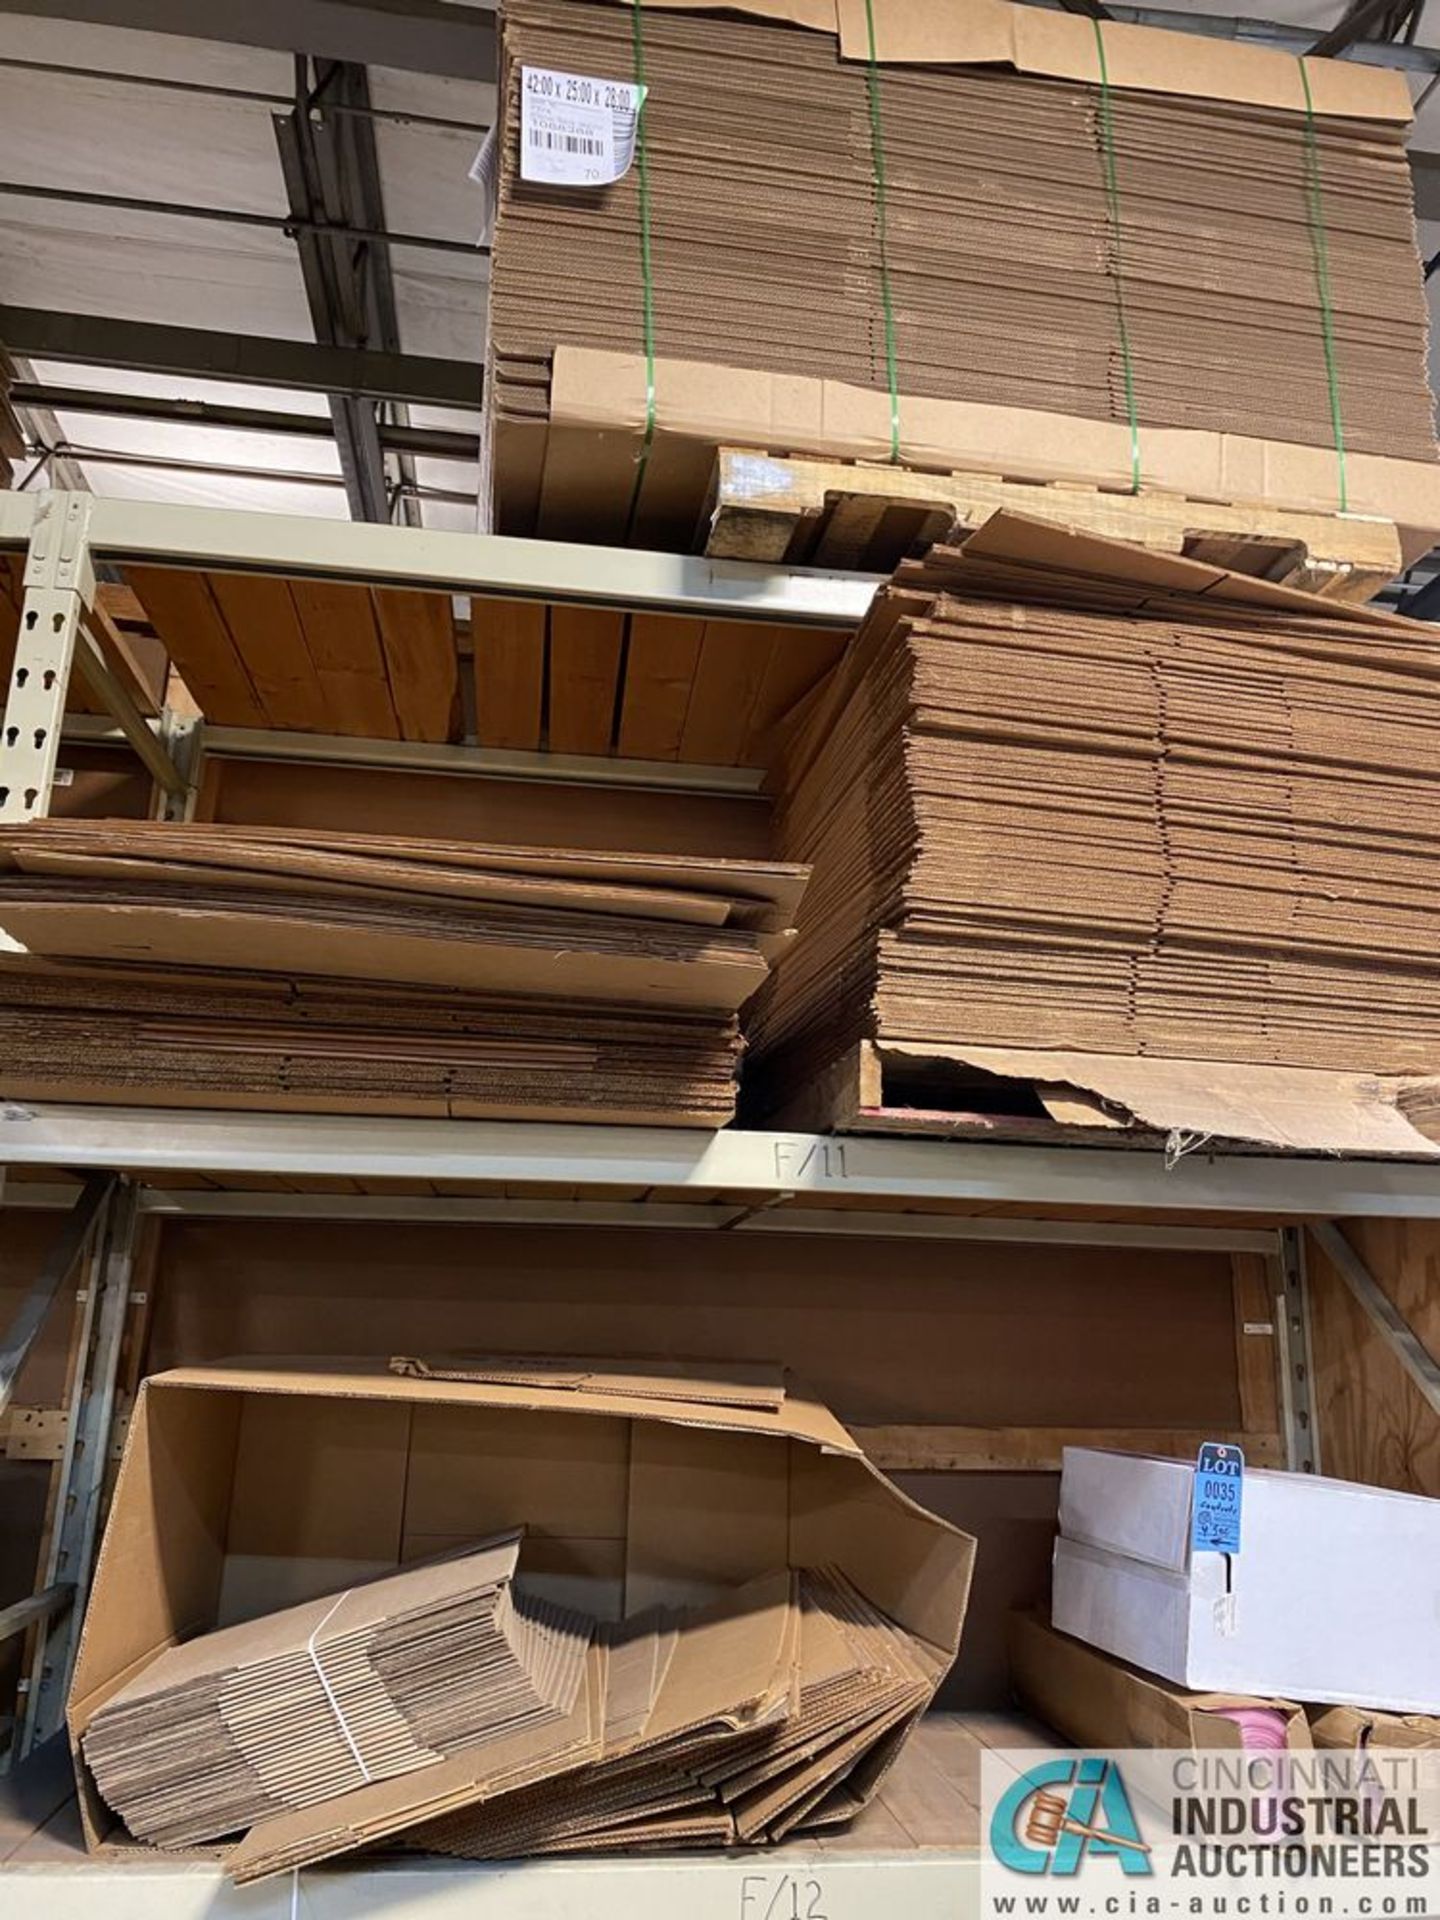 (LOT) CONTENTS OF 4-SECTIONS PALLET RACK - ASSORTED CORRUGATED BOXES AND OTHER SHIPPING SUPPLIES - Image 6 of 6